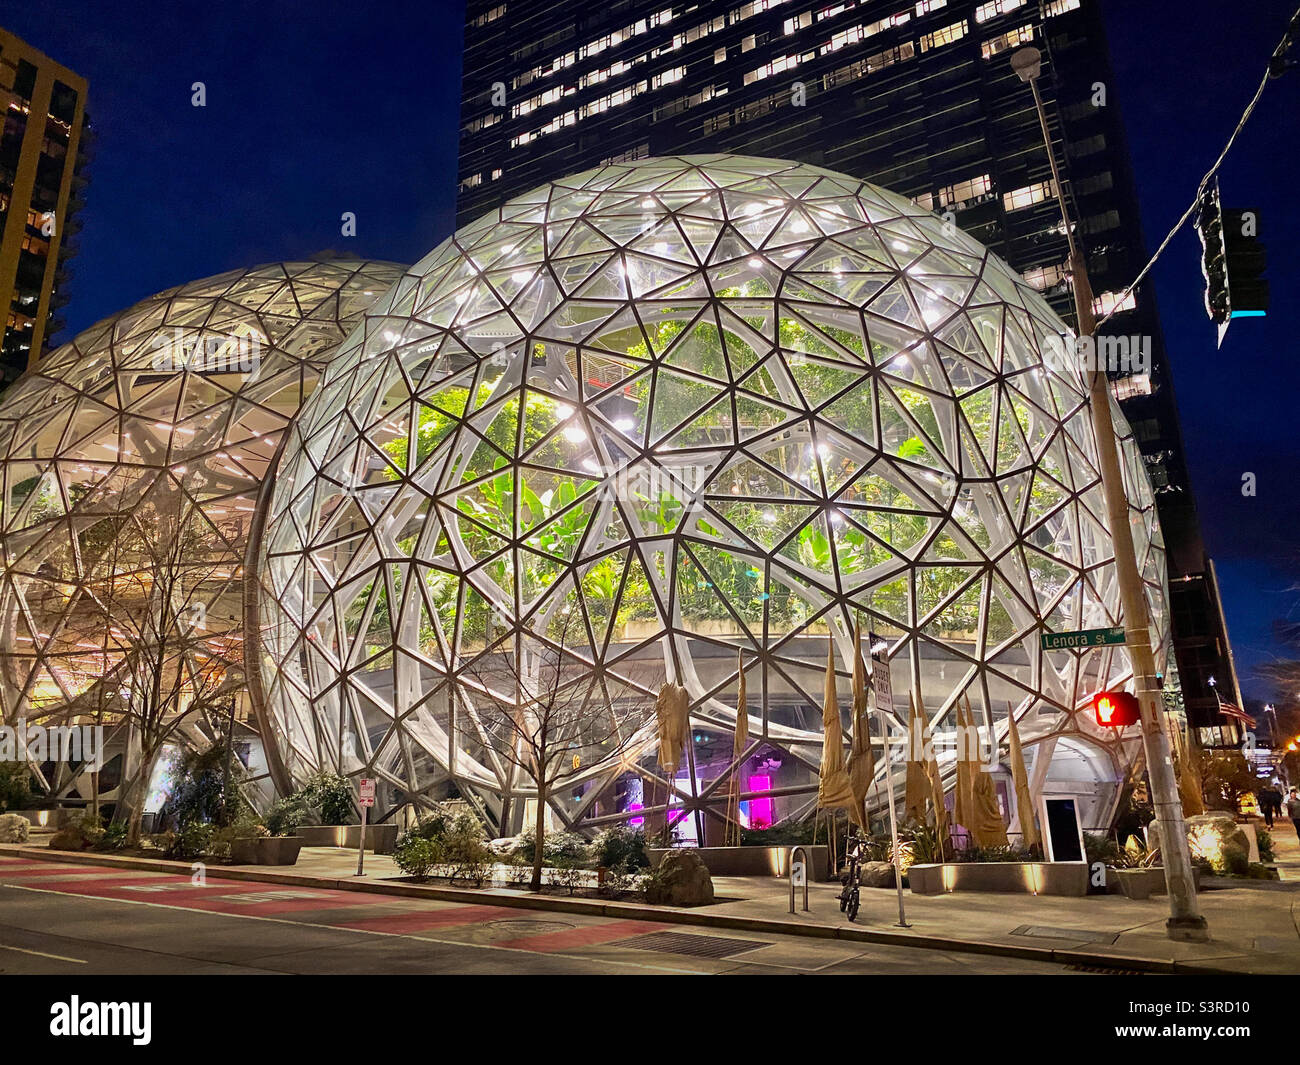 The Spheres at Amazon Headquarters in downtown seattle Stock Photo